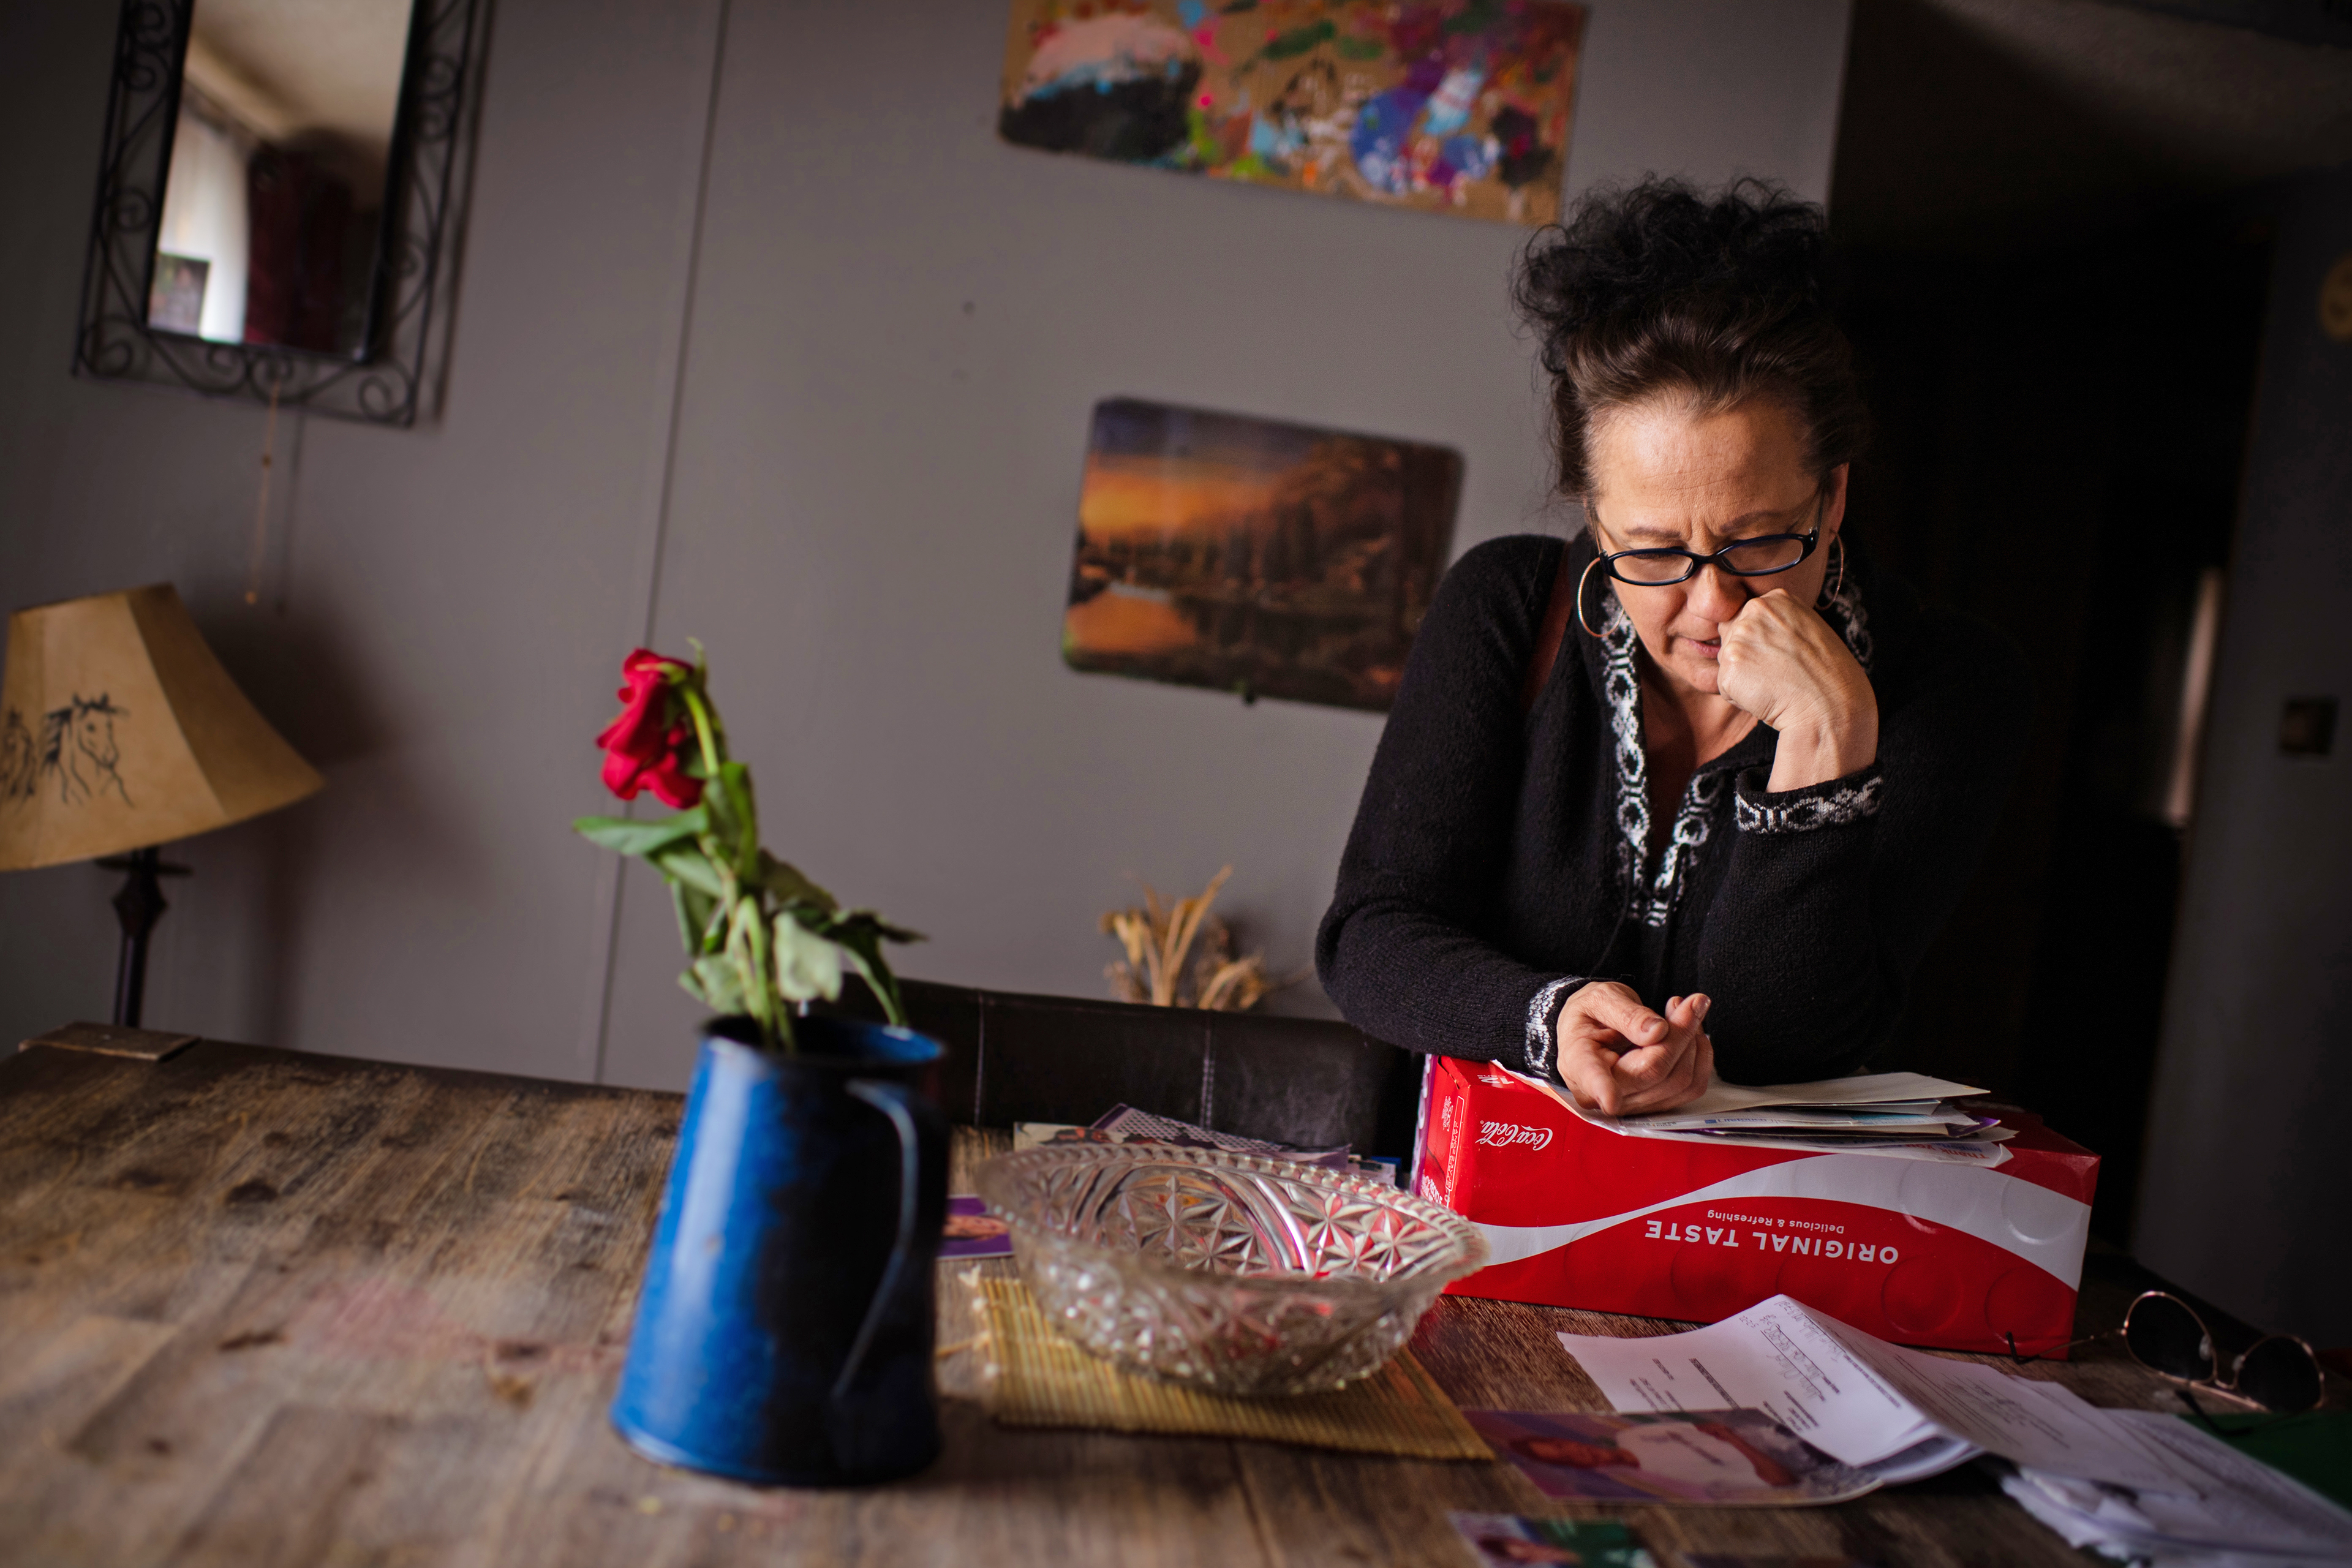 Marla Ollinger is seen looking at papers and photos on a table in her home. Light is coming in from the left, casting the right side of her in shadow.